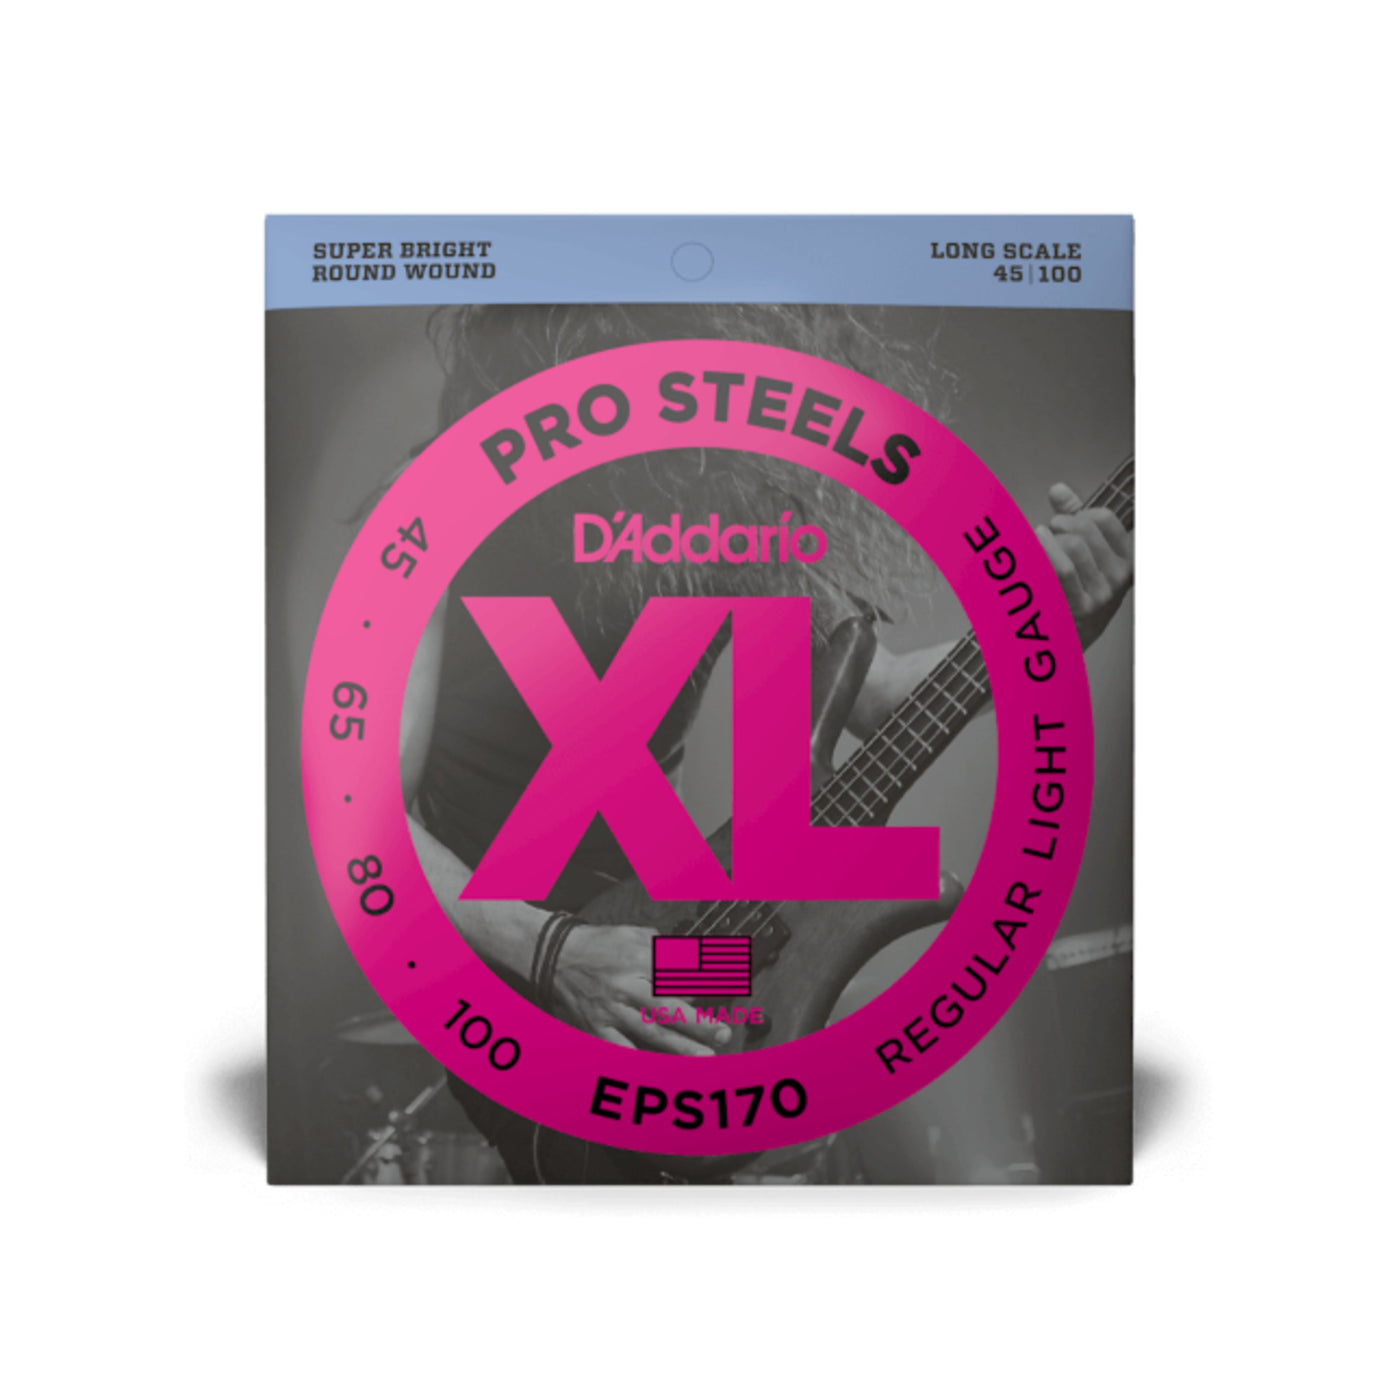 D'Addario ProSteels Bass Guitar Strings, Light, 45-100, Long Scale (EPS170)